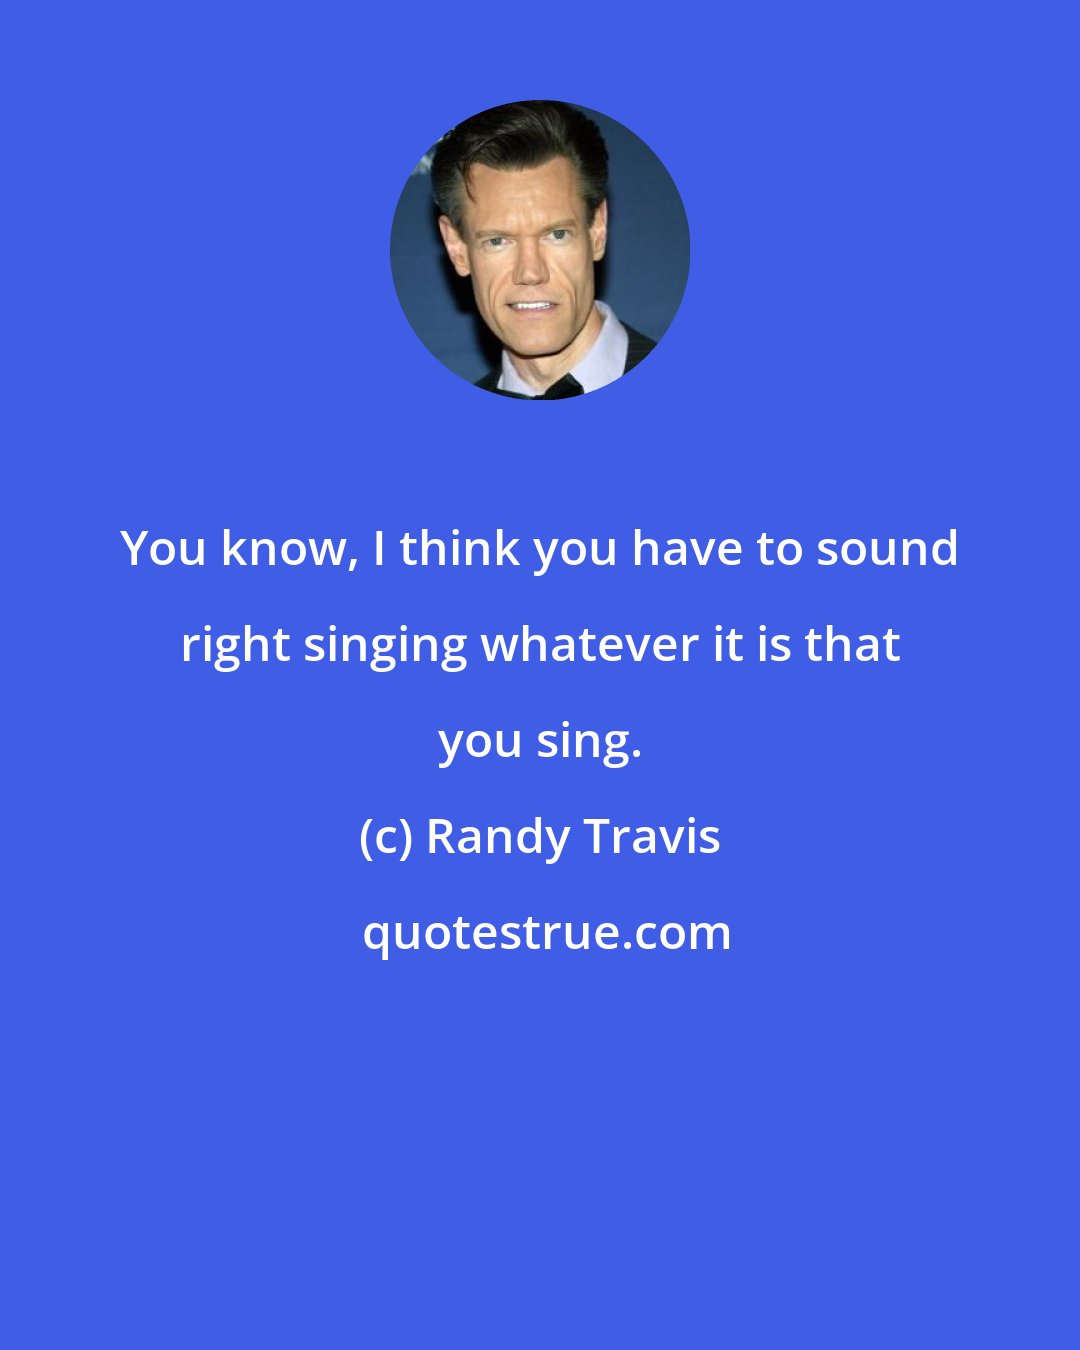 Randy Travis: You know, I think you have to sound right singing whatever it is that you sing.